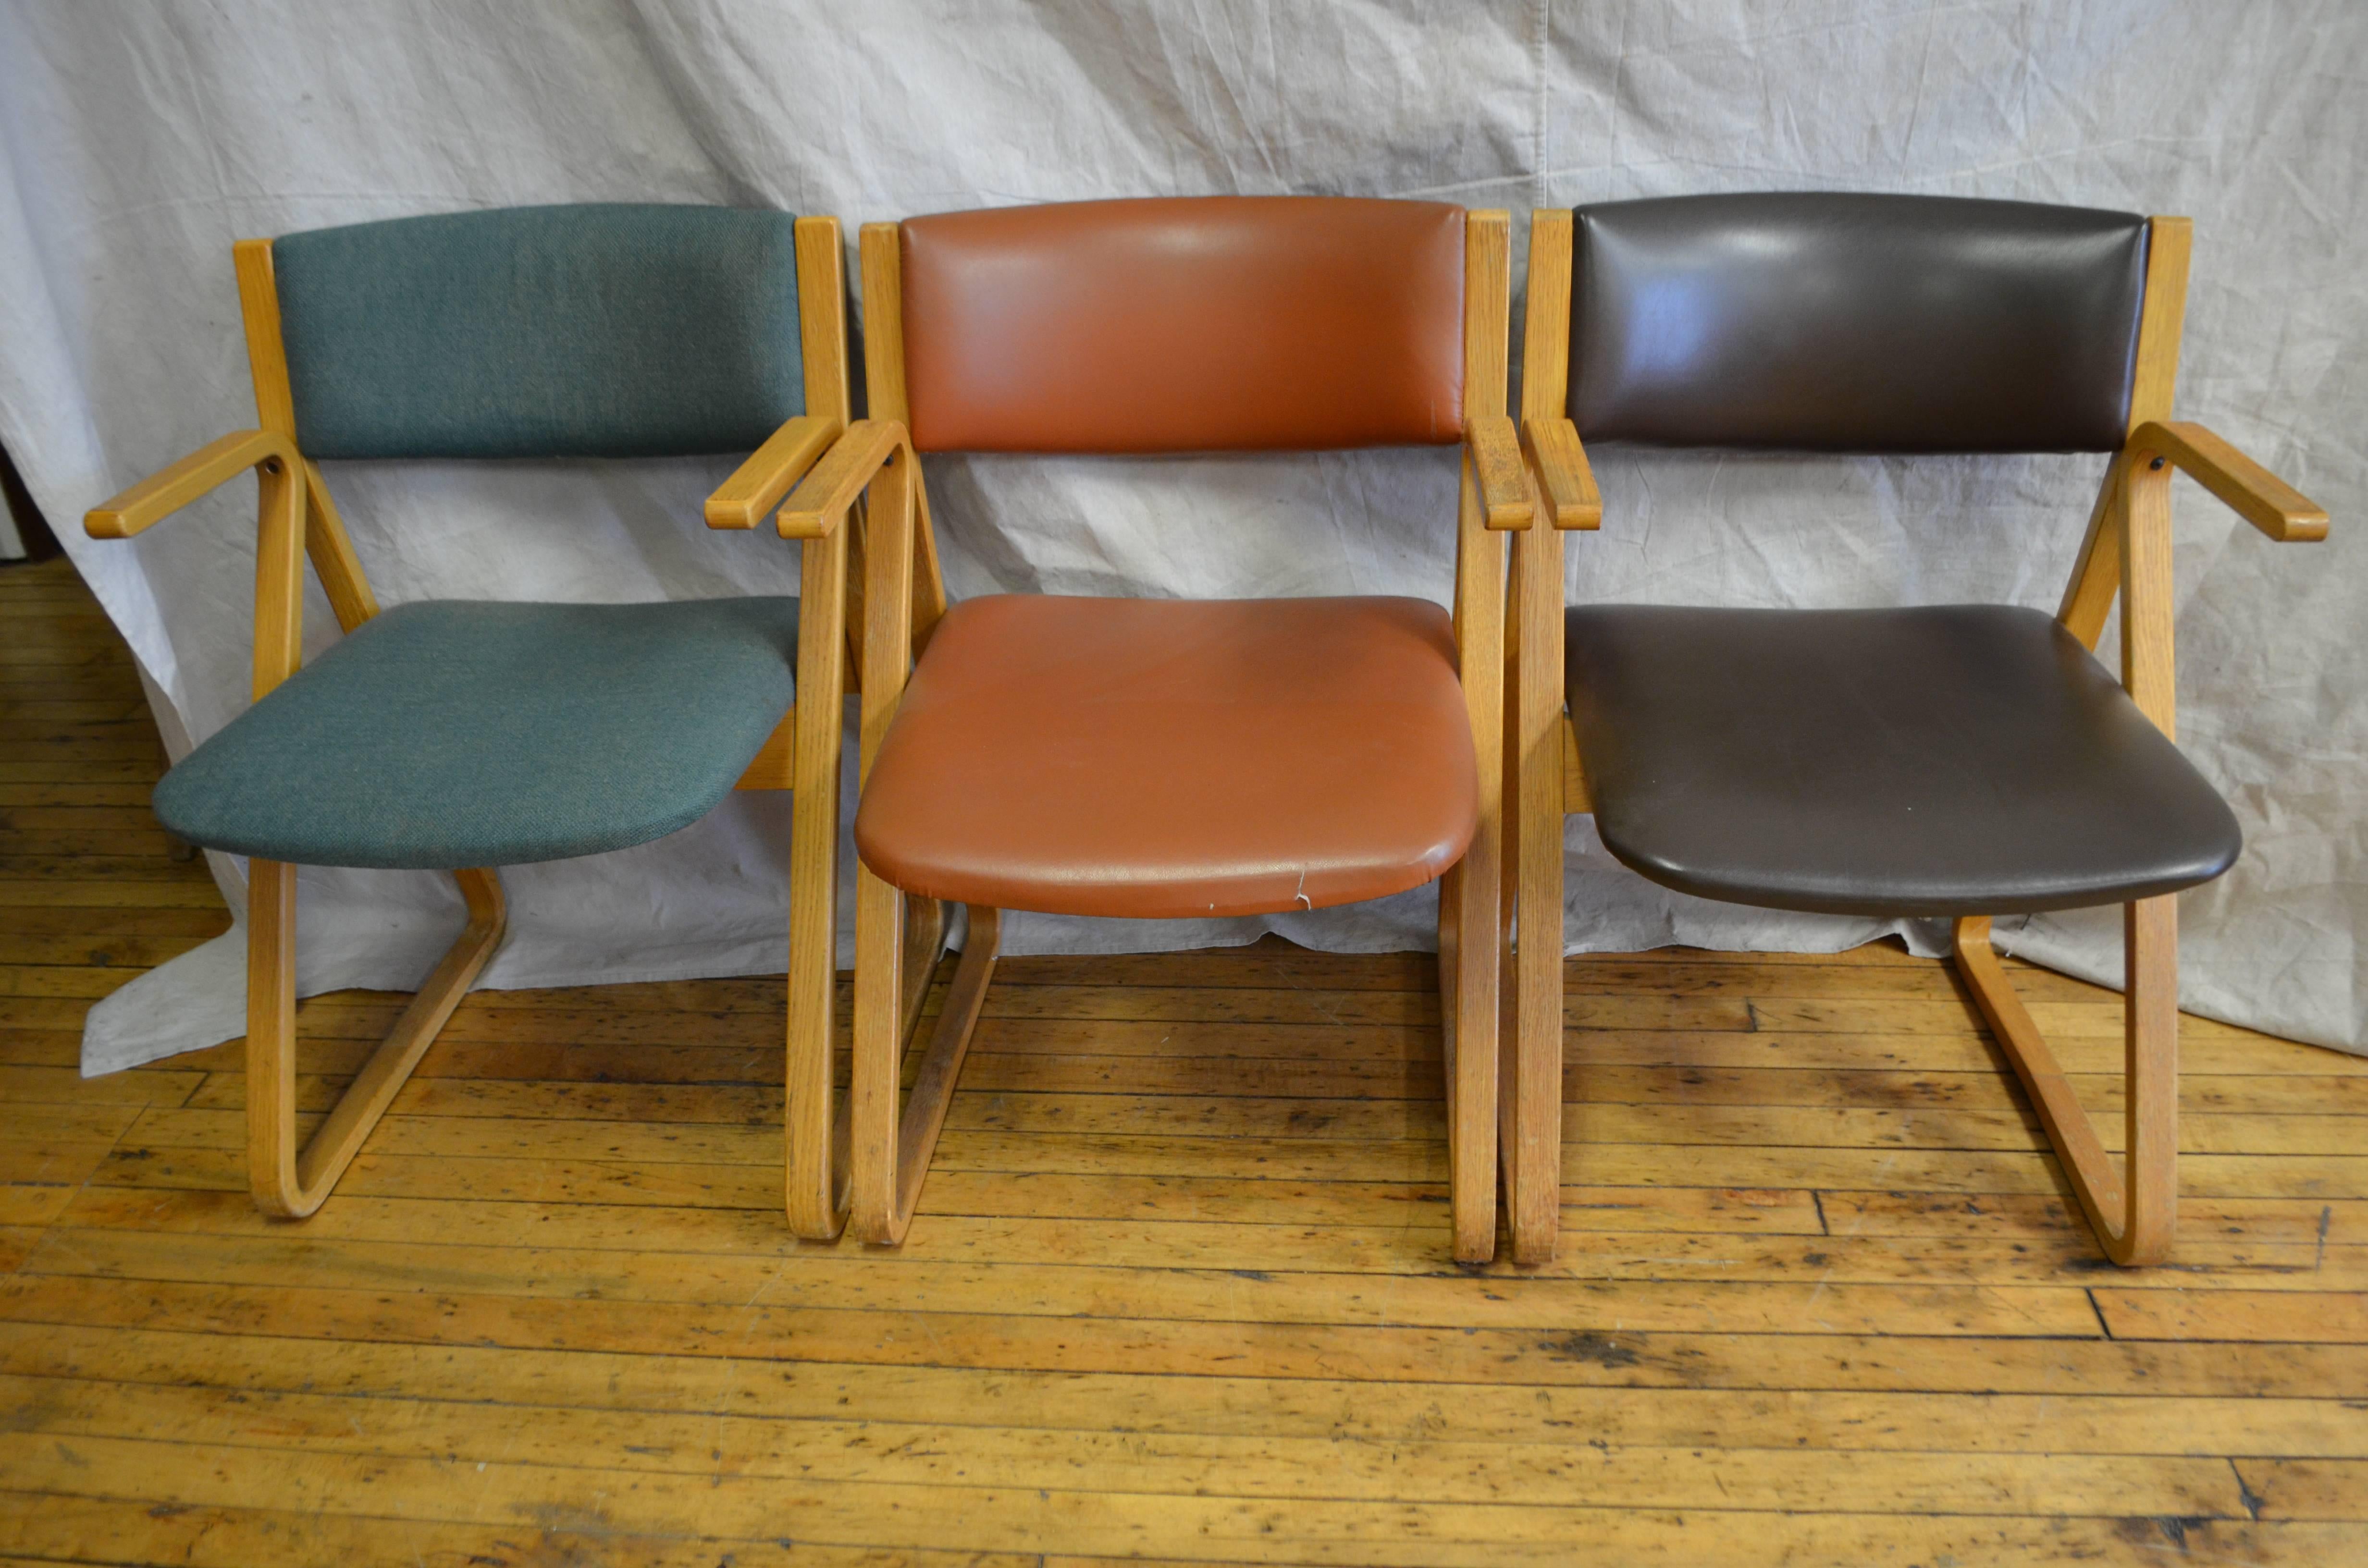 Dining room chairs from Stow/Davis of Michigan. Set of three, Mid-Century Modern. Their frames are maple. Two are upholstered in Naugahyde, one in nylon. Solid, comfortable and clean. Ideal as side chairs, for overflow holiday seating, for a smaller